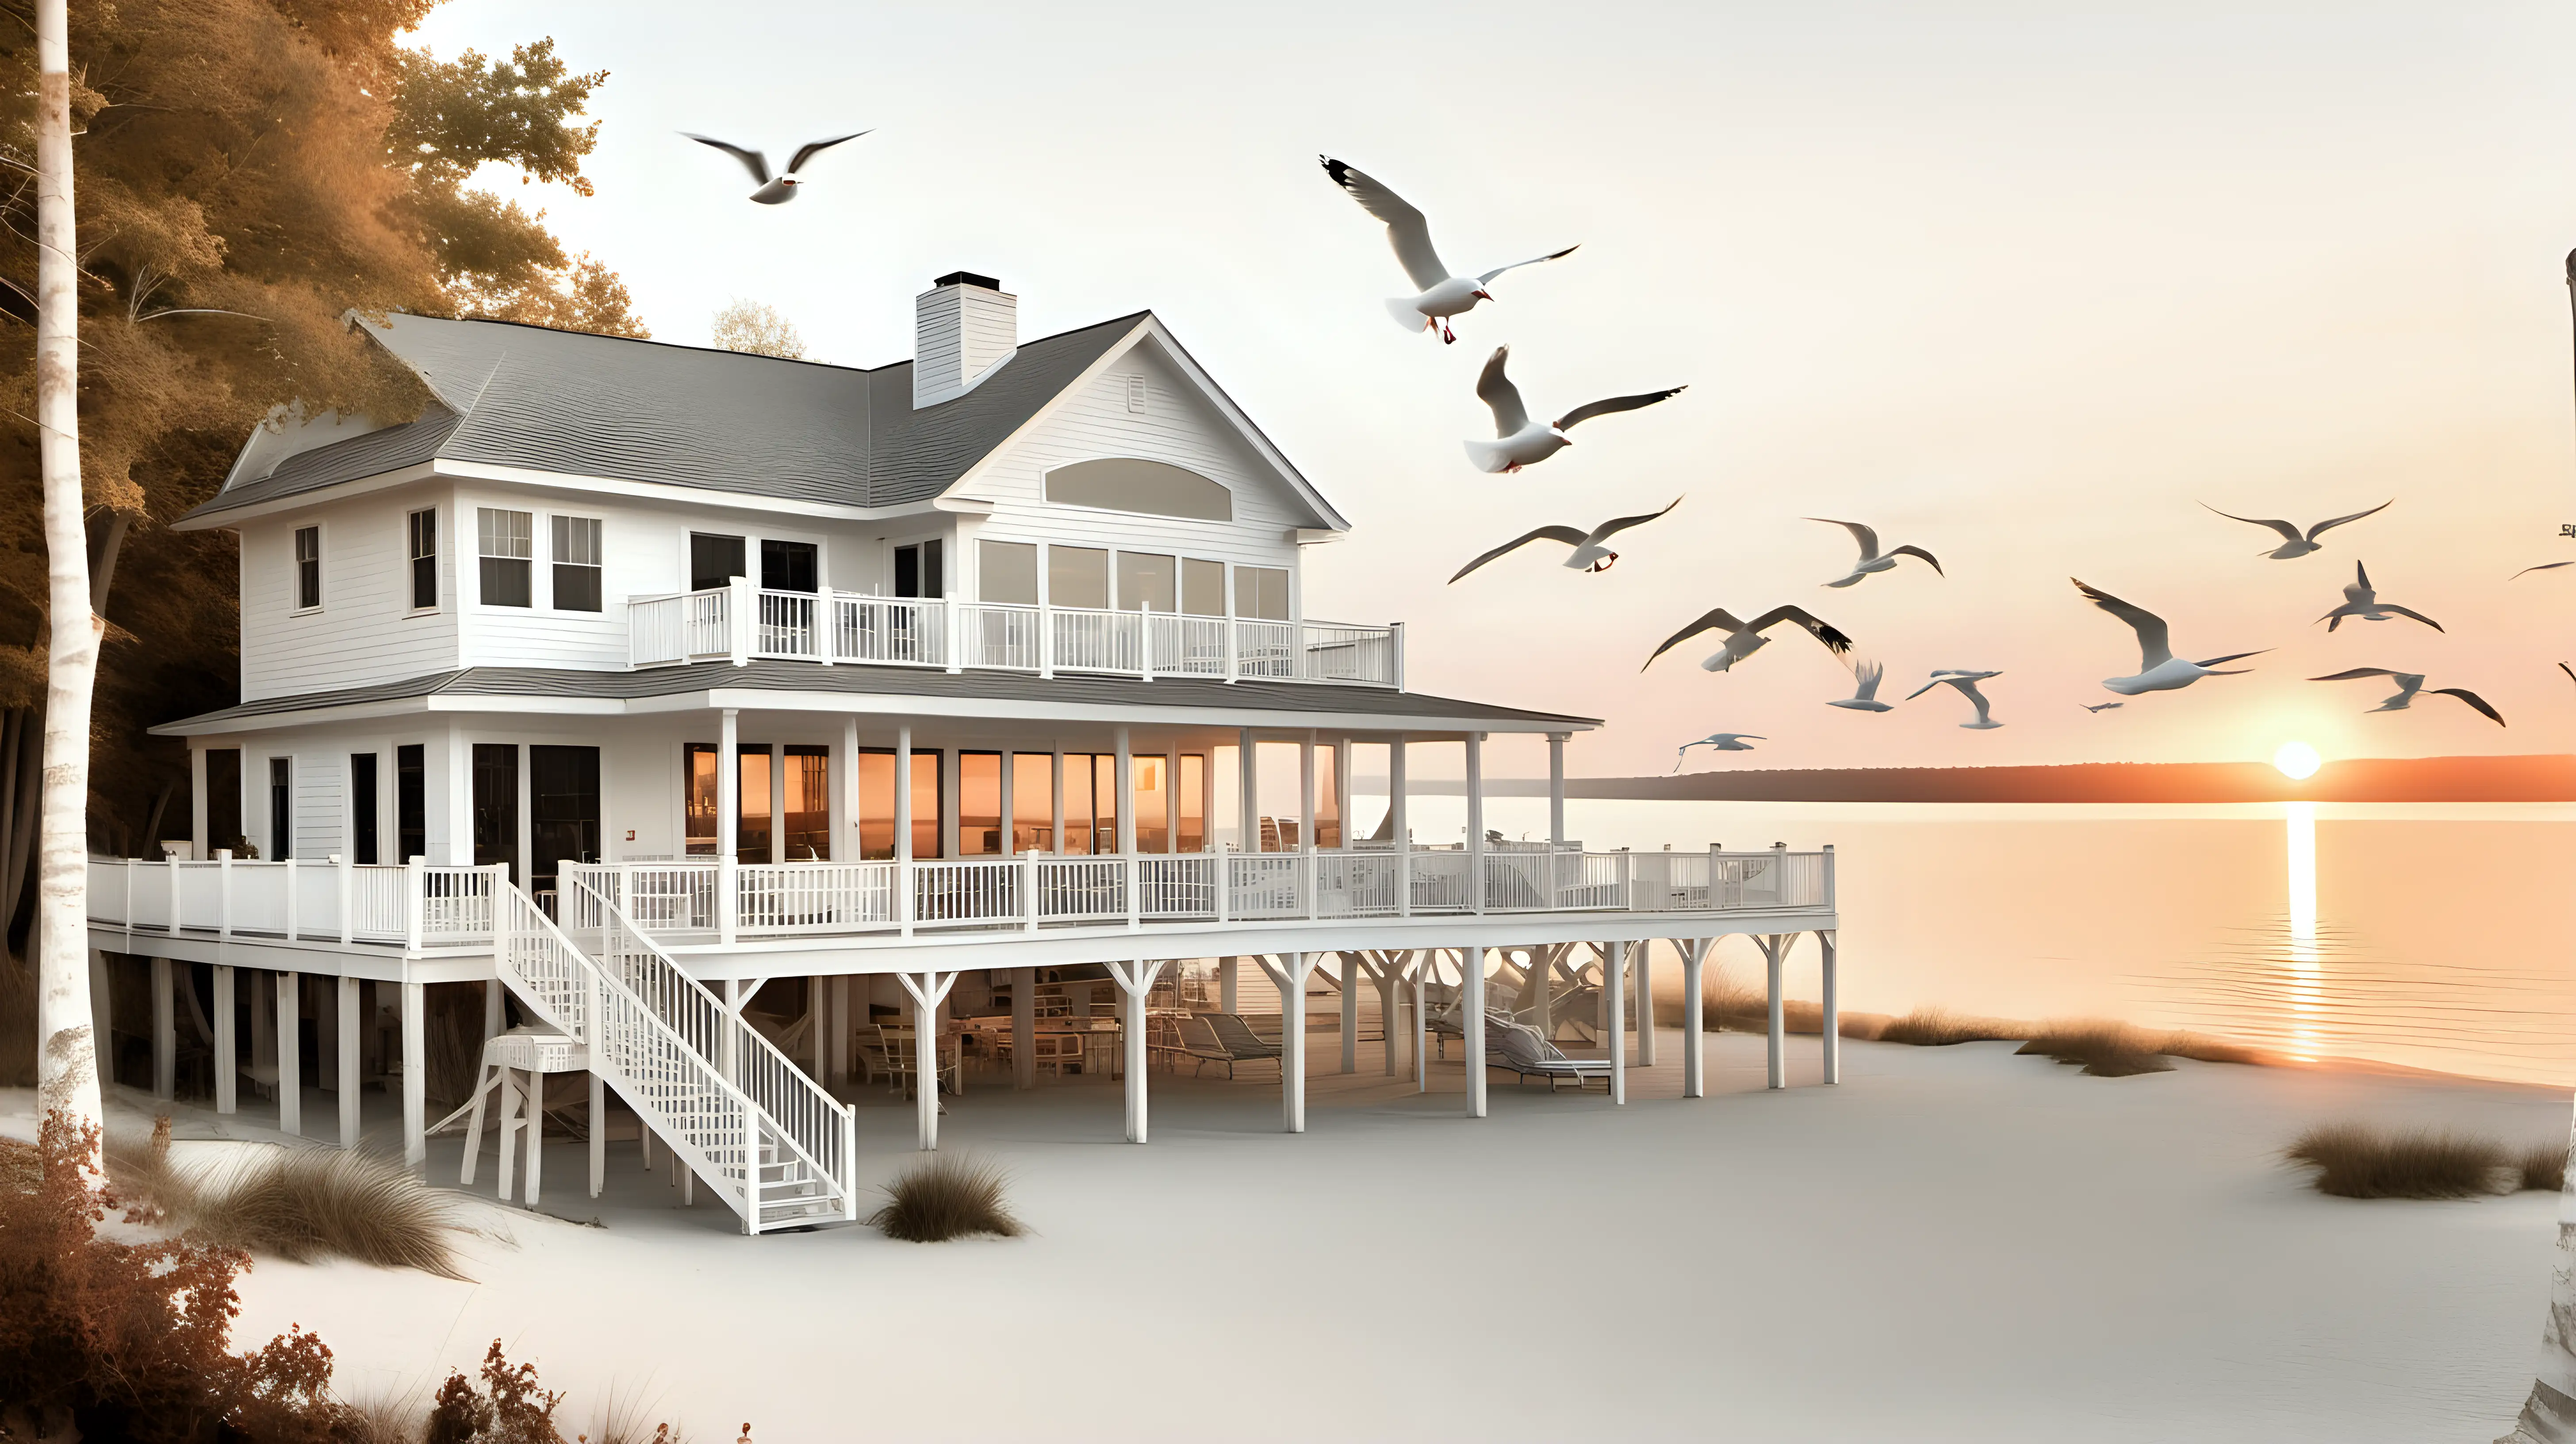 Tranquil Lakehouse Scene at Sunset with Beach Chairs and Seagulls